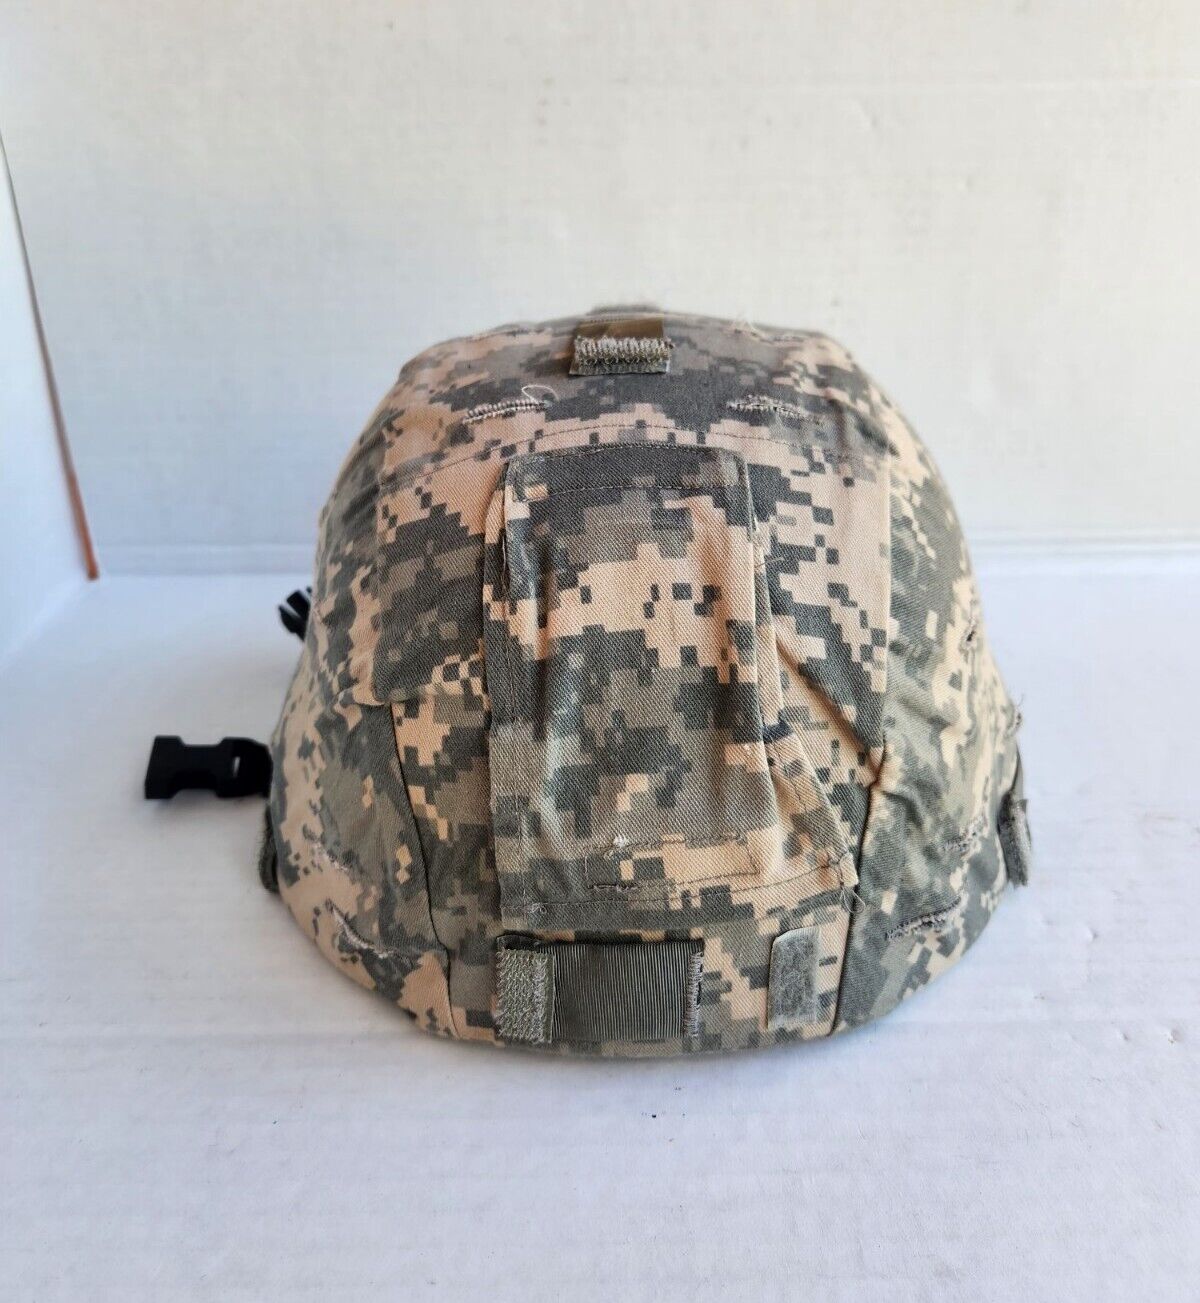 US Military ACH Warrior Helmet by SDS with Camo Cover Size Medium